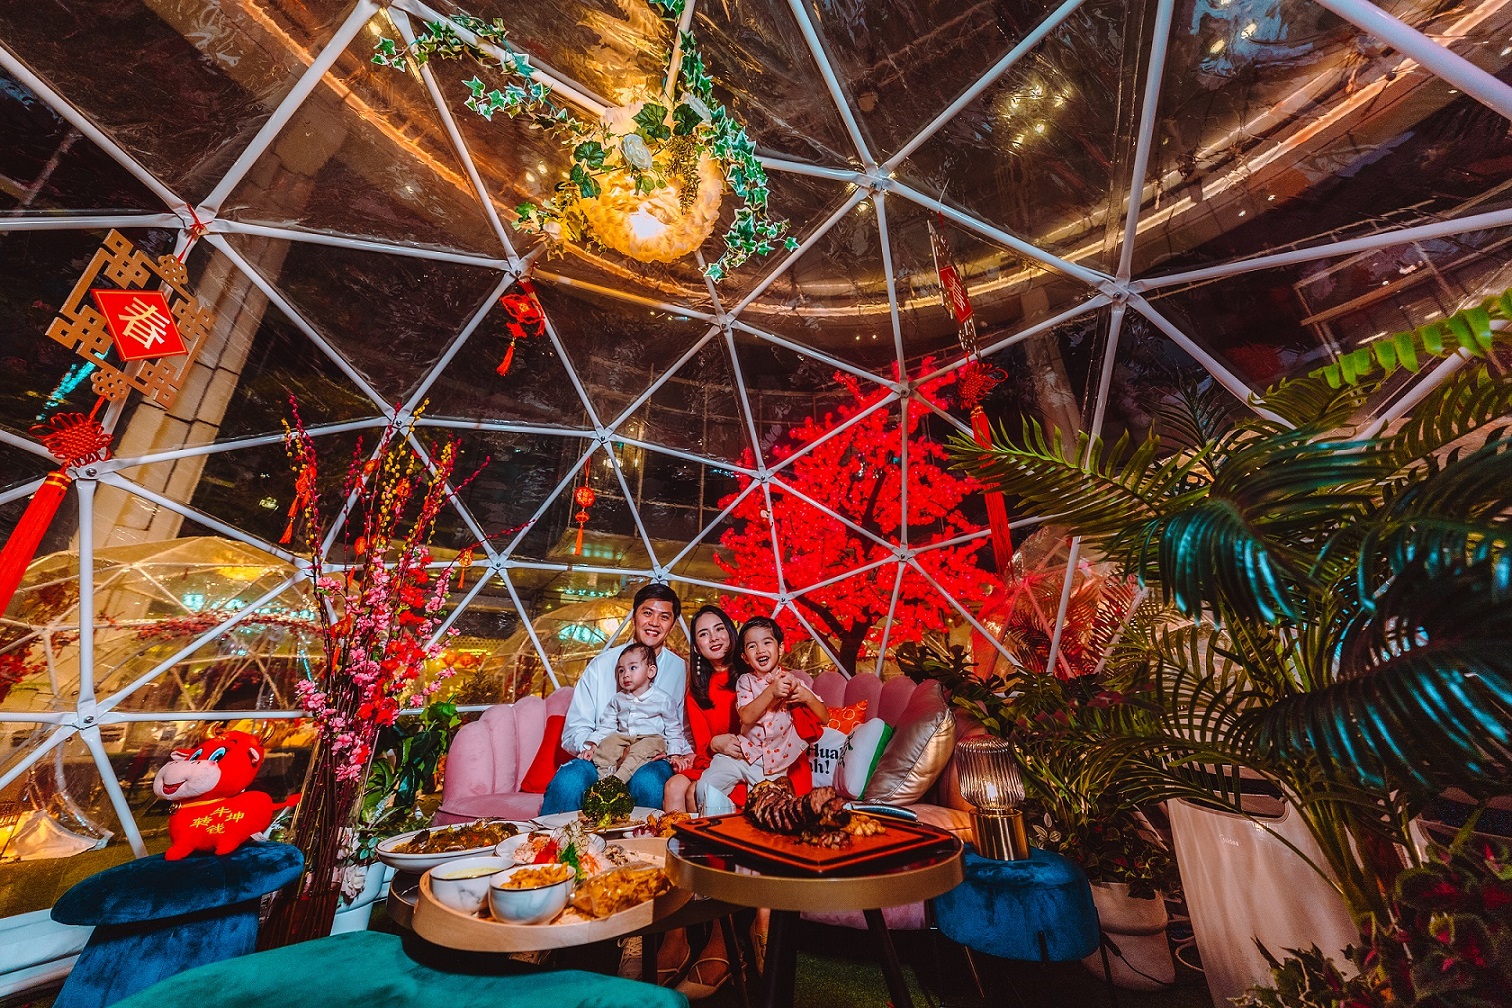 [PROMO] Lo Hei in Charming Festive Domes, get crafty with CNY workshops, and Win Prizes Worth More Than $100, all at Capitol Singapore - Alvinology